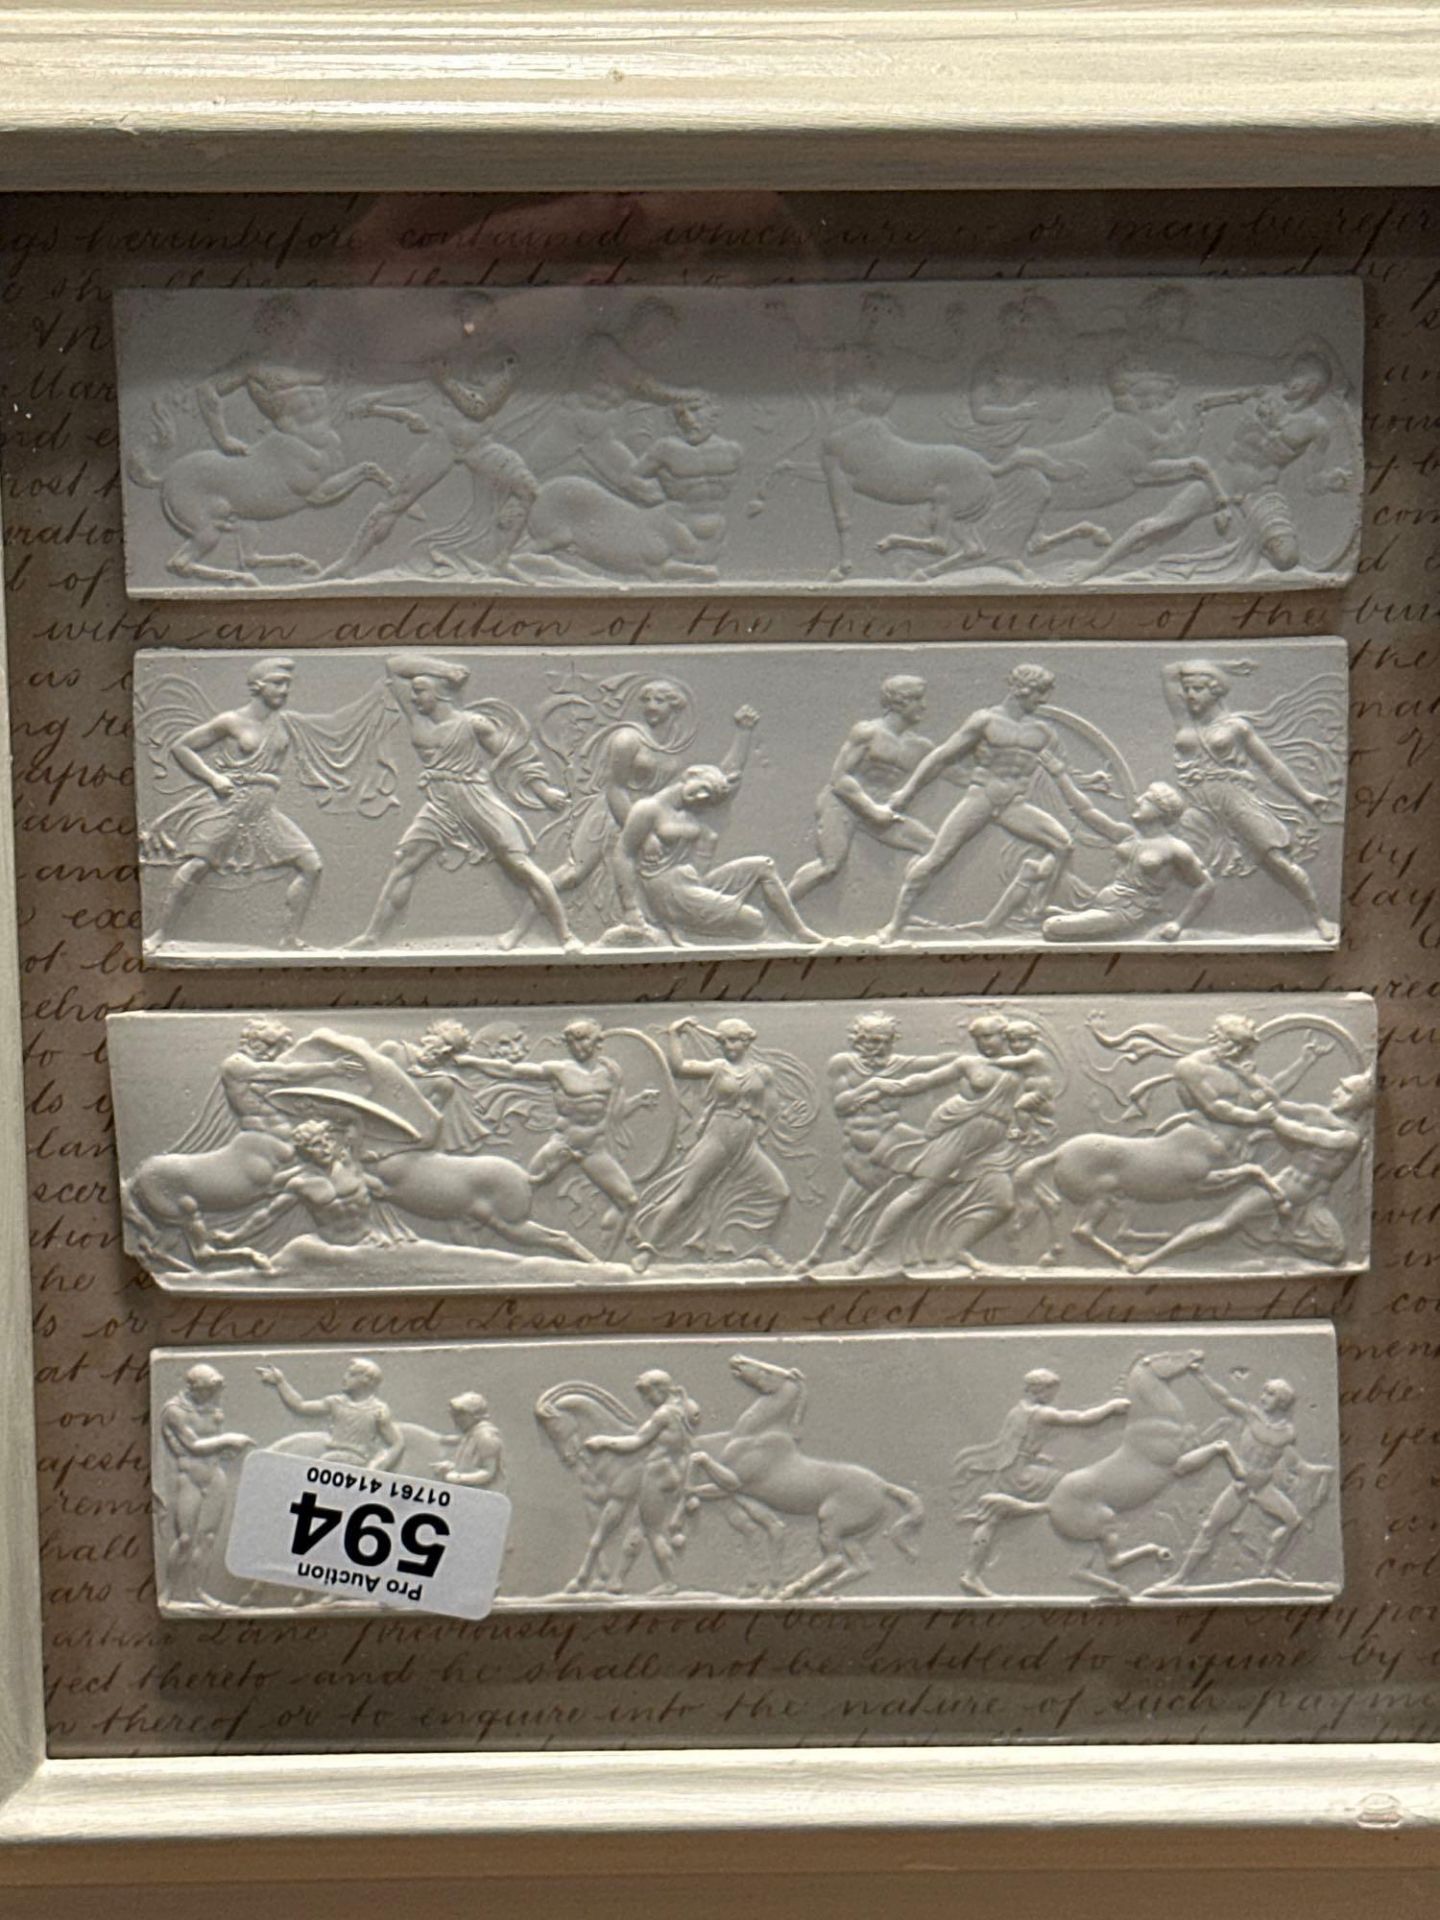 A Set of 4 x Framed Artwork of Plaster Relief Panels Depicting Friezes of The Parthenon 41 x 43cm ( - Image 5 of 6